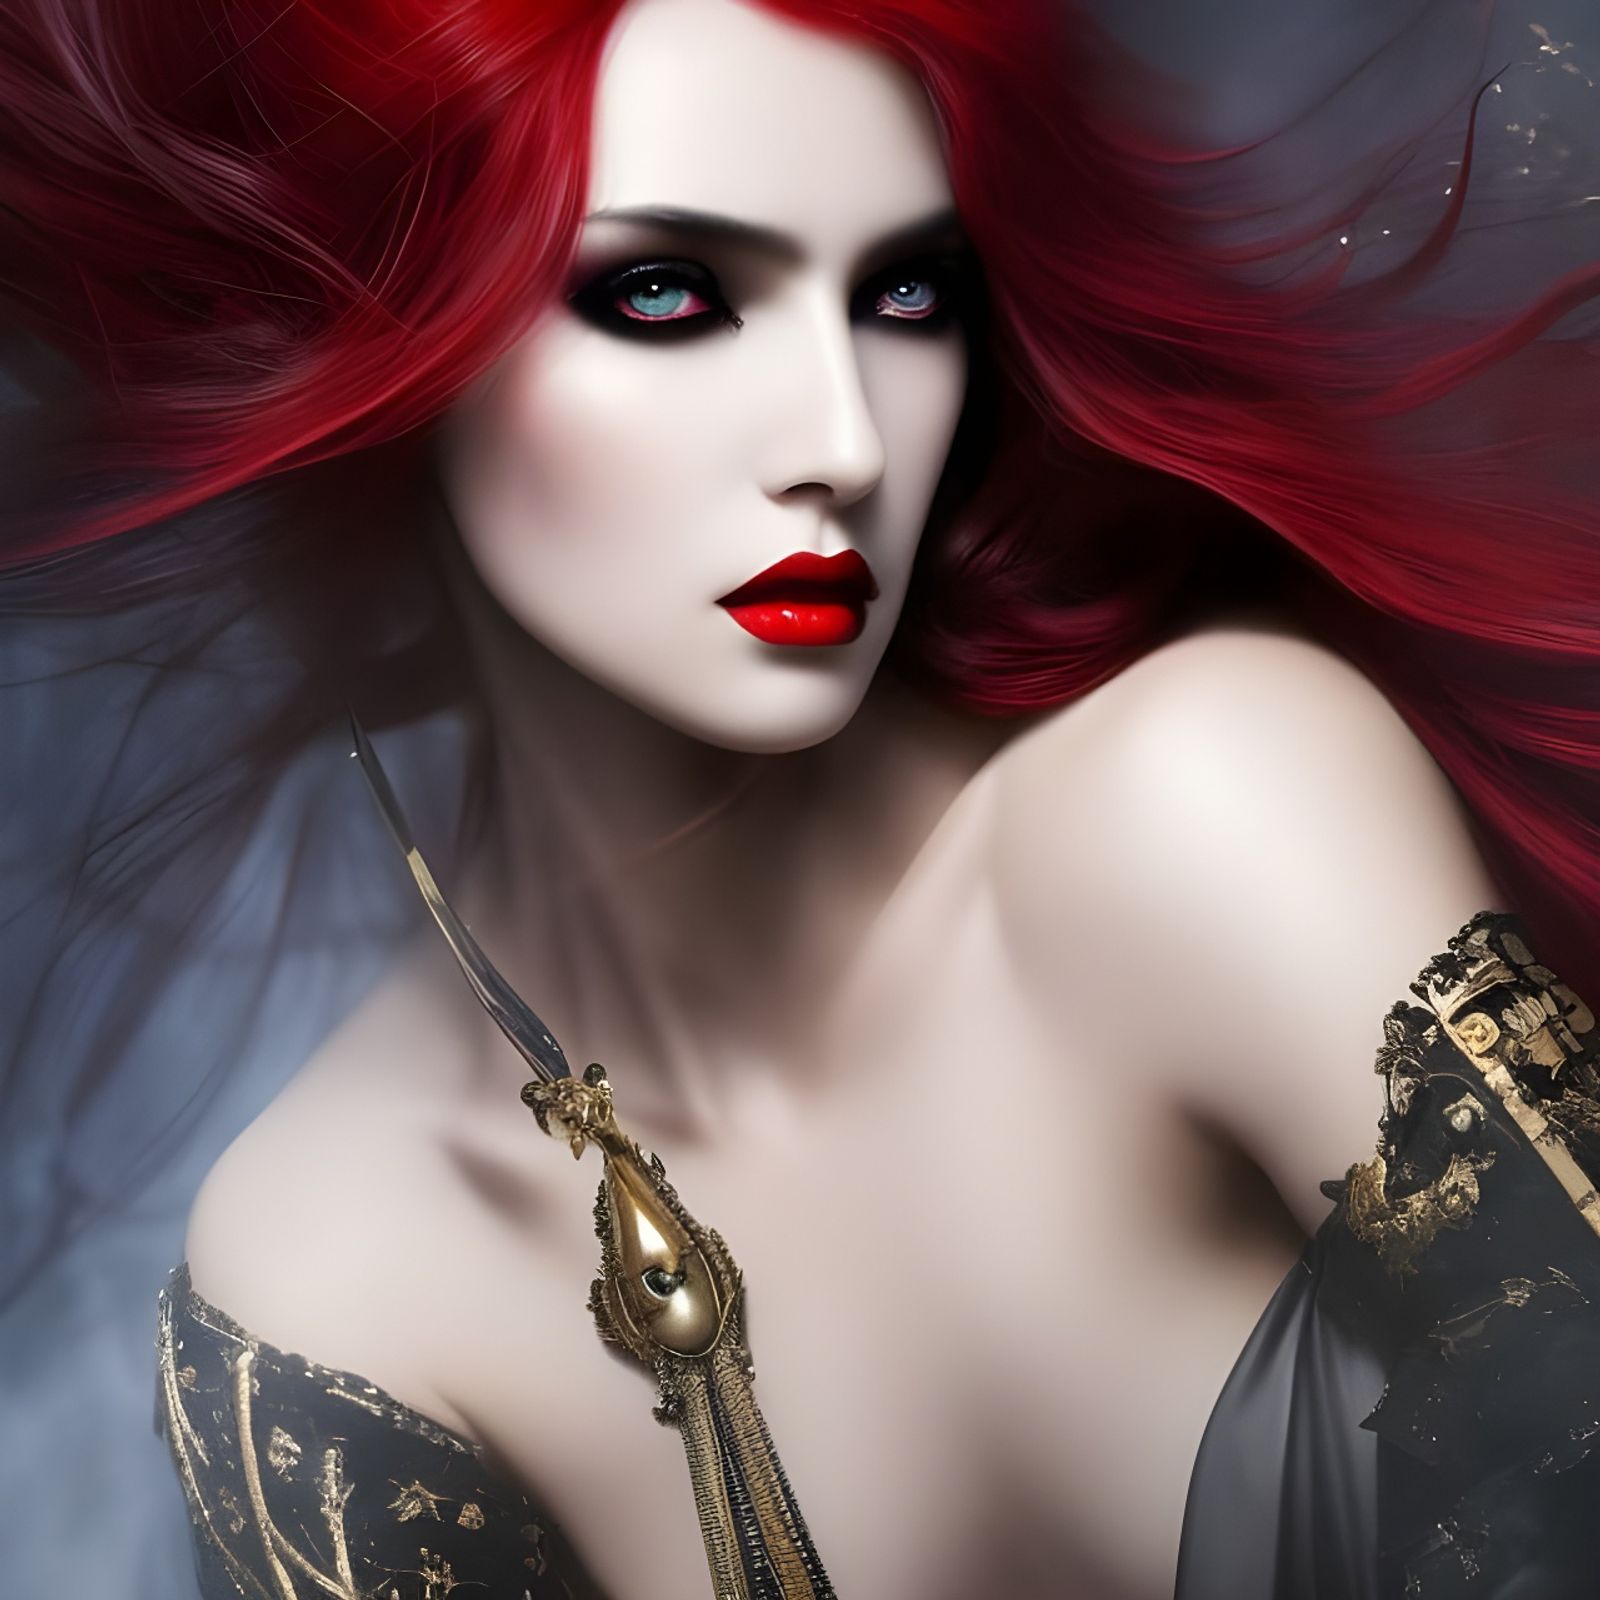 gothic red hair beauty, crown of thorns, mindblowing beauty ...